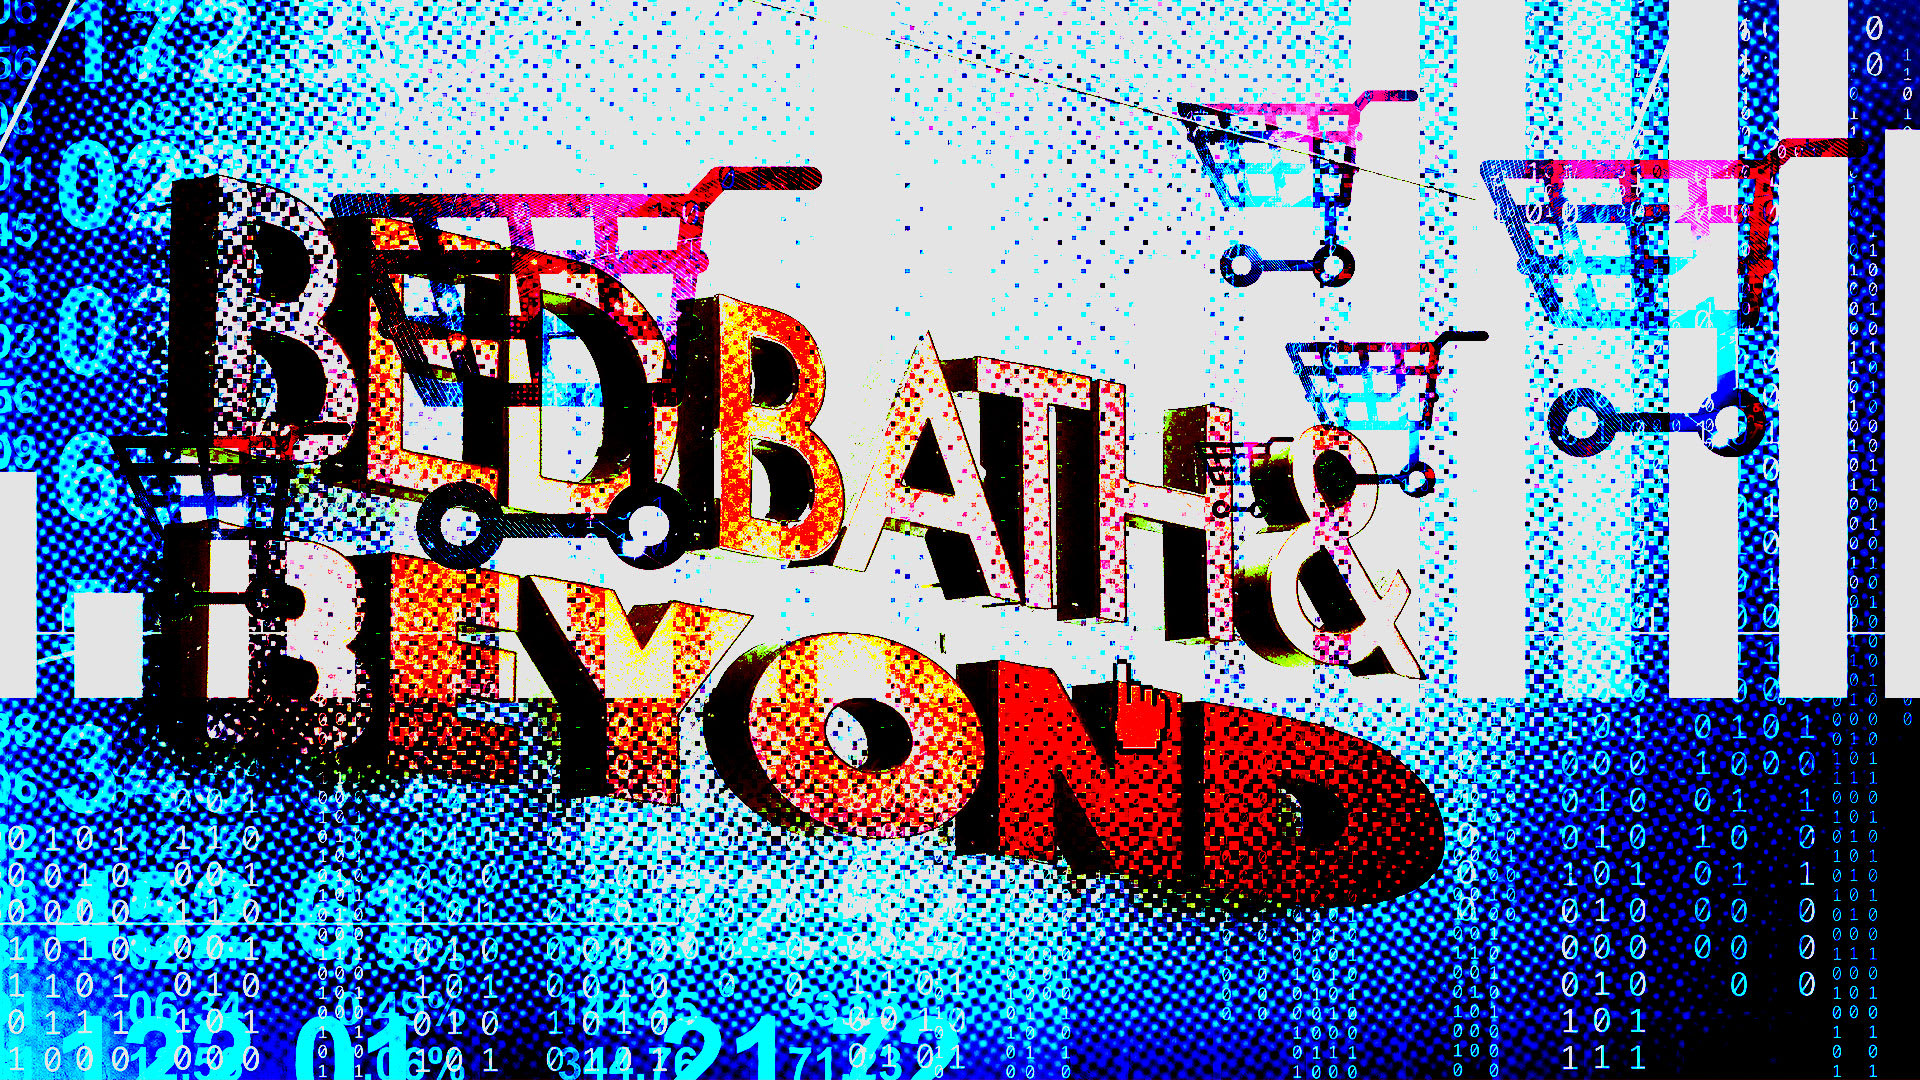 Death of a meme stock: Why Bed Bath and Beyond’s stock is crashing for a second day